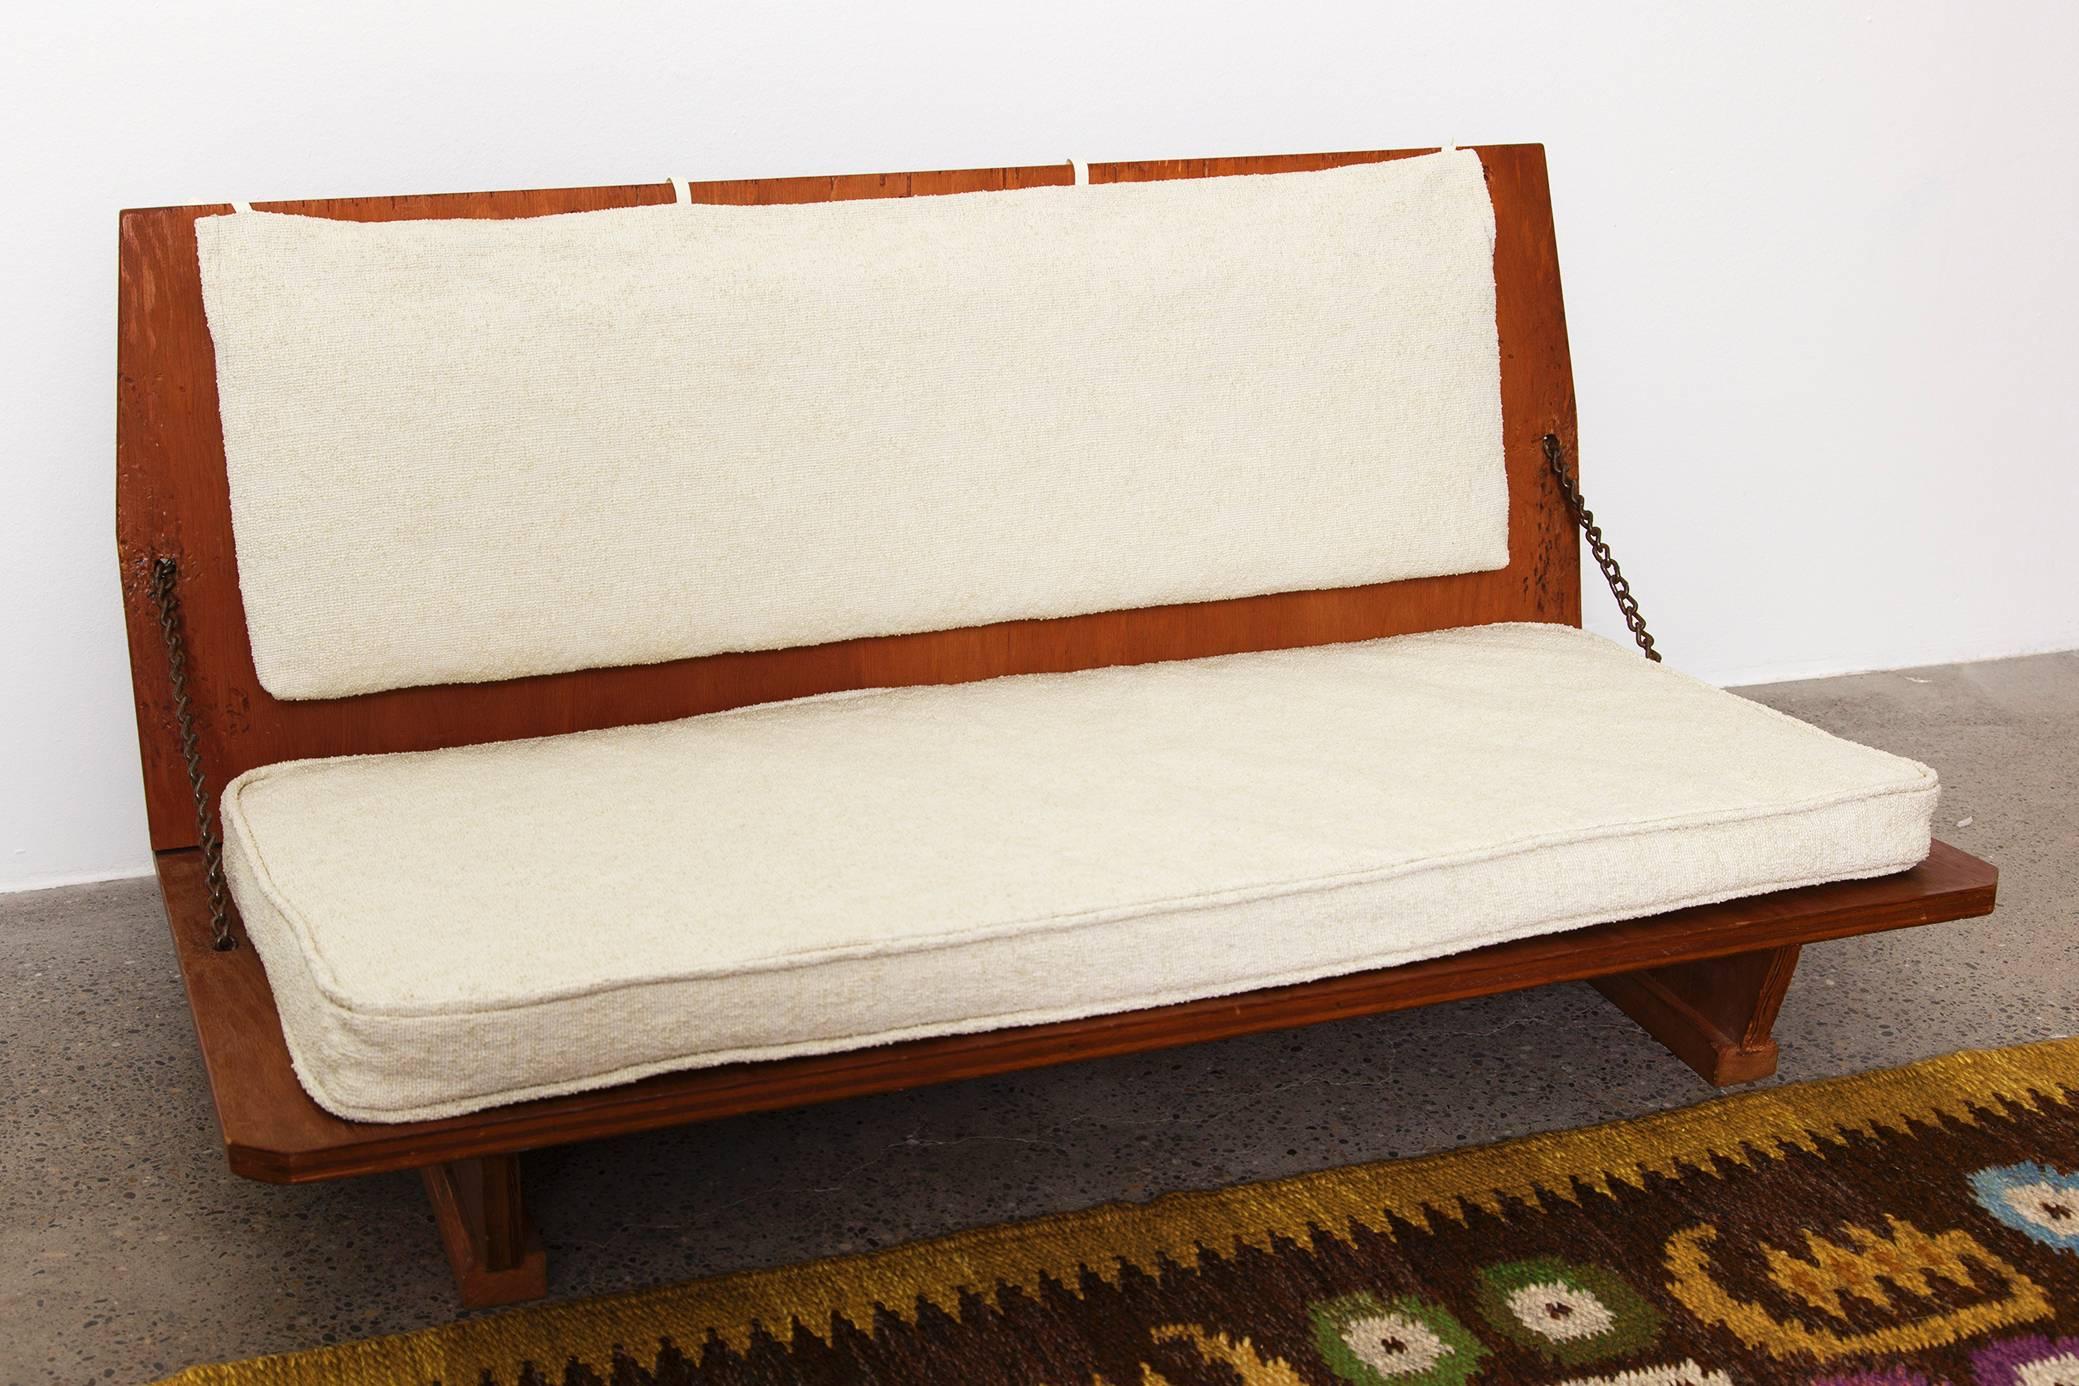 A pair of original benches by Frank Lloyd Wright from the Unitarian Church in Madison, USA, 1951. They are foldable, in stained pine plywood, chains on both sides and newly upholstered in a white cotton linen mix fabric. They still have the original